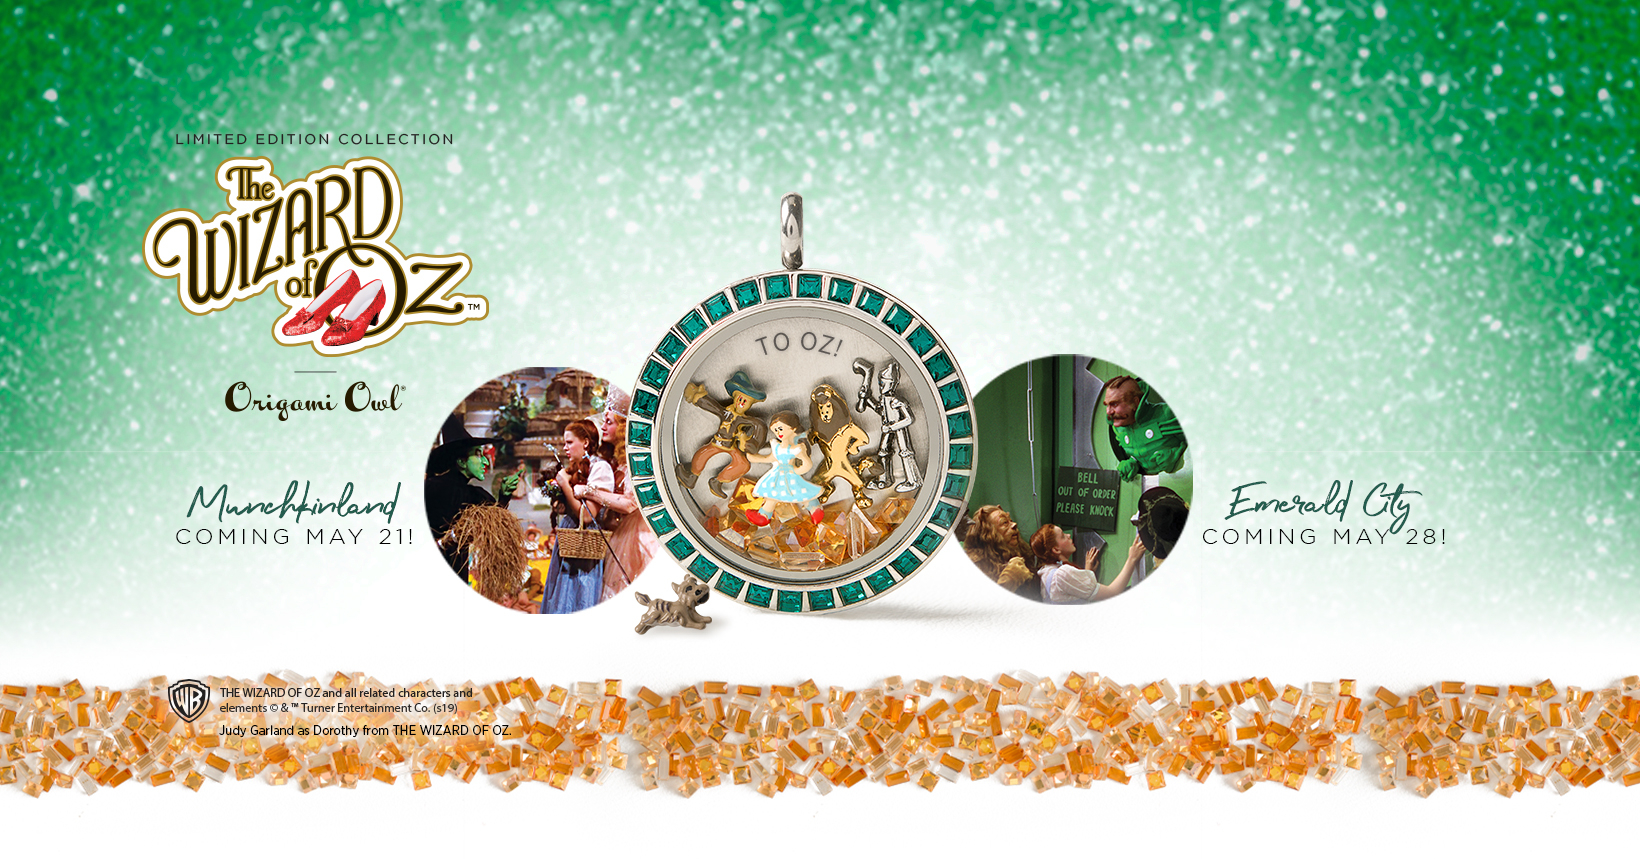 Origami Owl Prices Introducing The New Limited Edition Wizard Of Oz Jewelry Collection